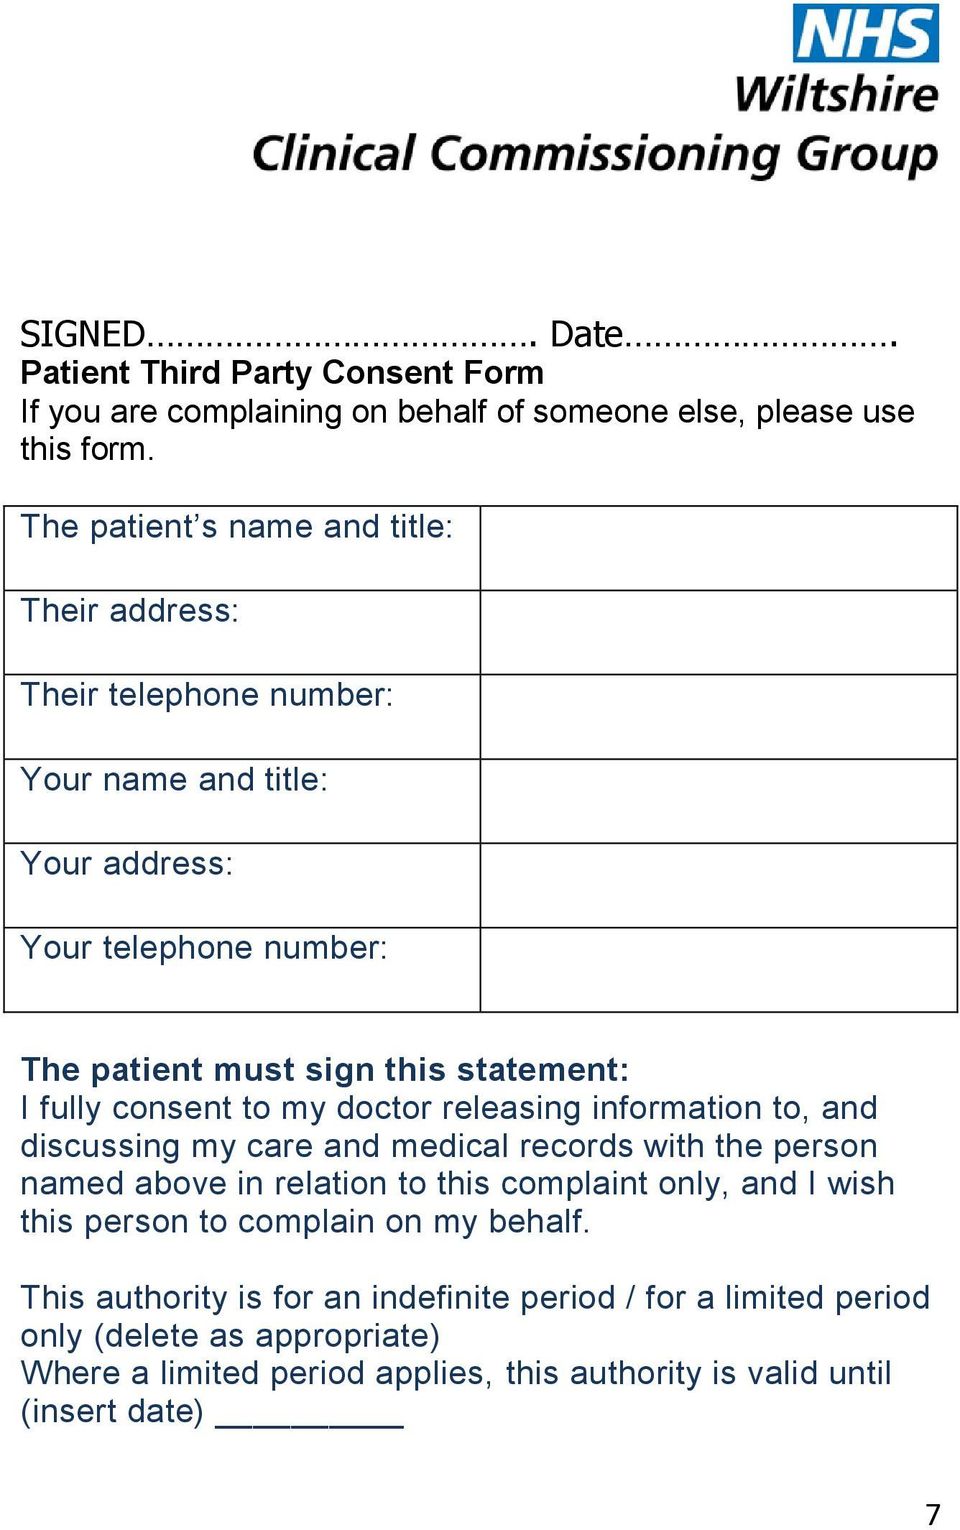 fully consent to my doctor releasing information to, and discussing my care and medical records with the person named above in relation to this complaint only, and I